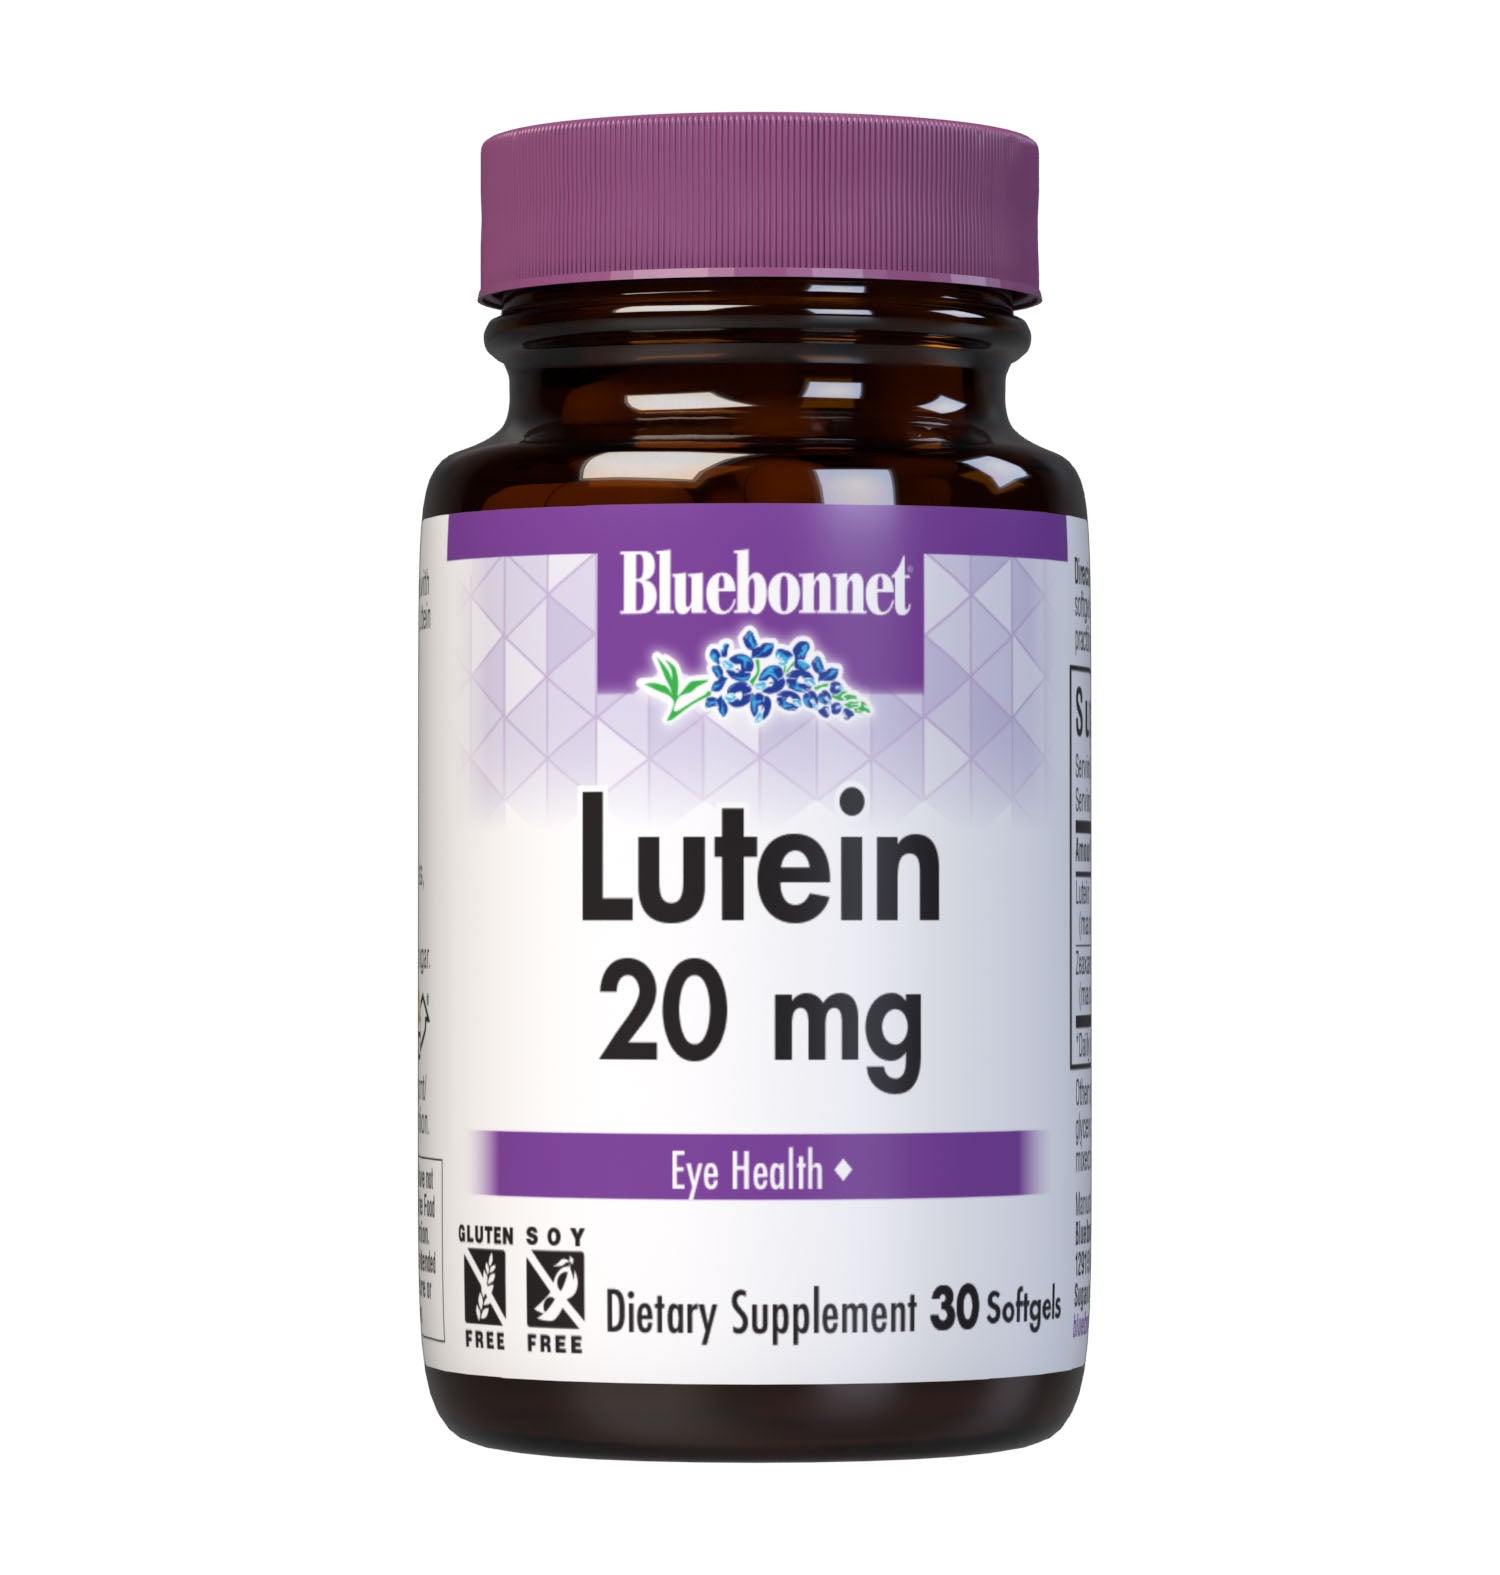 Bluebonnet’s Lutein 20 mg 30 Softgels are formulated with lutein and zeaxanthin from marigold flower extract. Lutein and zeaxanthin are carotenoids found in fruits and vegetables that support optimal eye health. #size_30 count